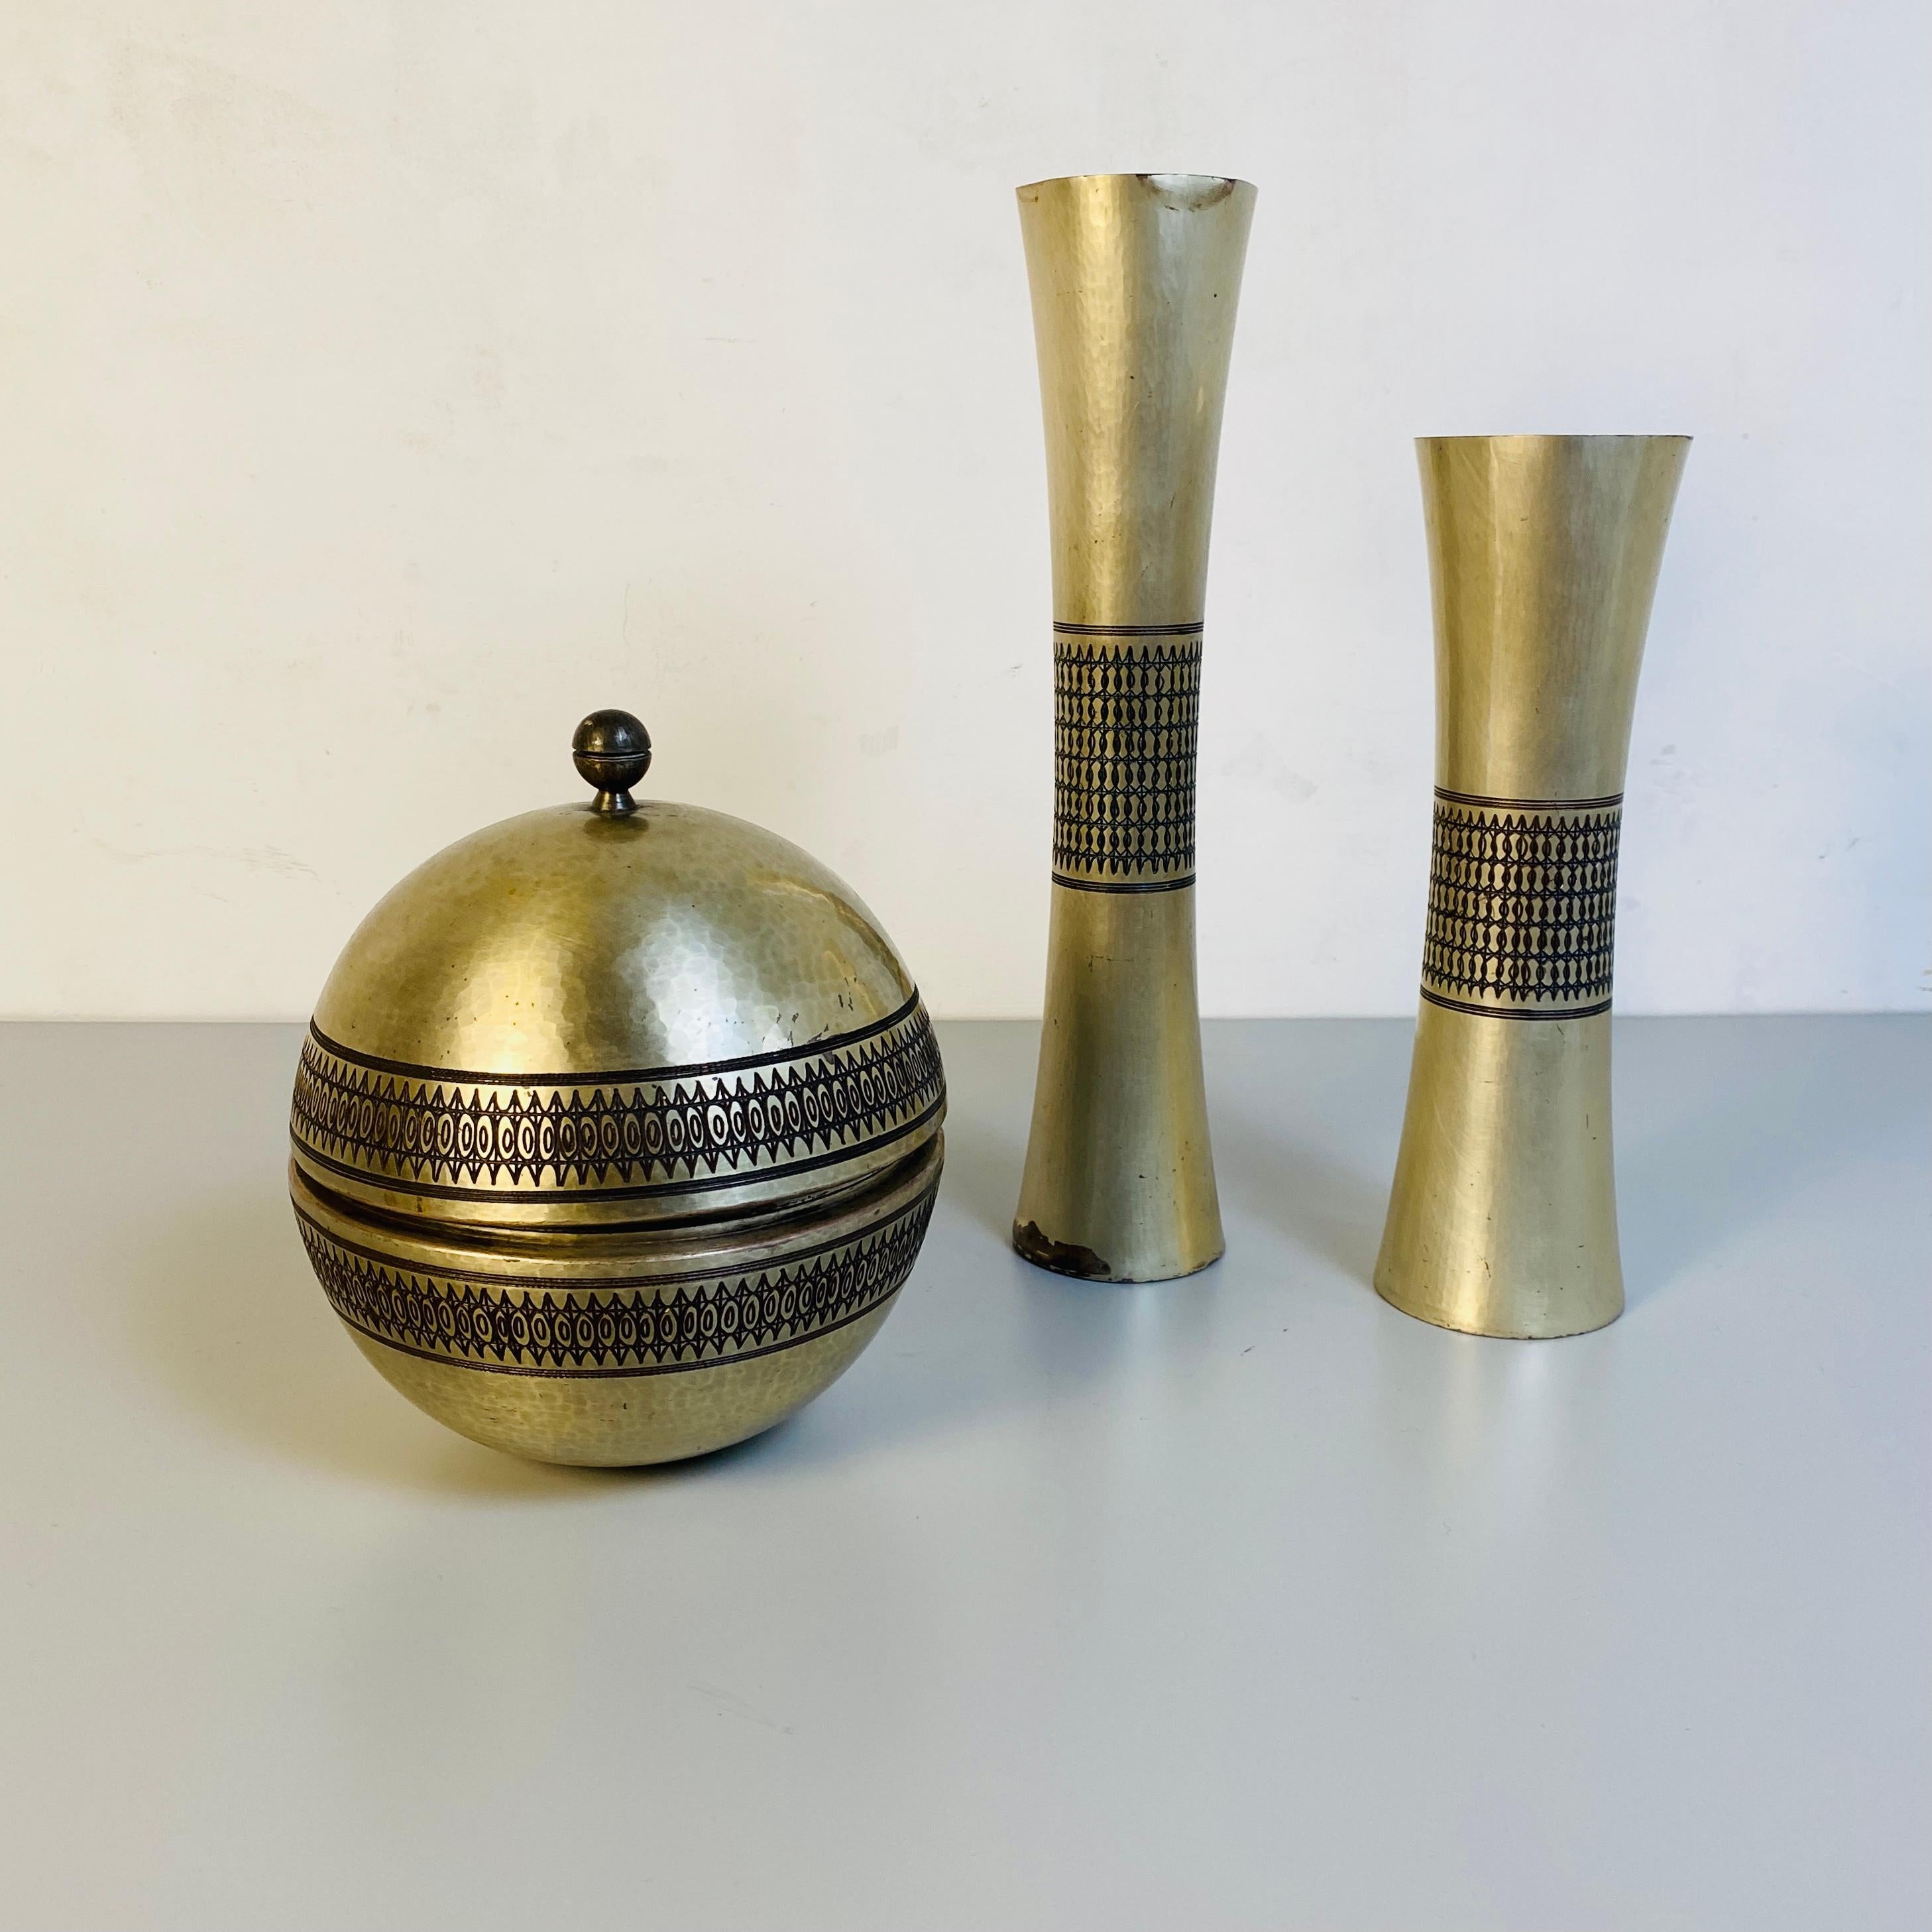 Italian Mid-Century Modern set of metal centerpieces with different shapes,1970s
Set of three decorated metal centerpieces of different shapes and sizes and engraved decorations.

Good conditions, defects visible in the photos.

Measures in cm